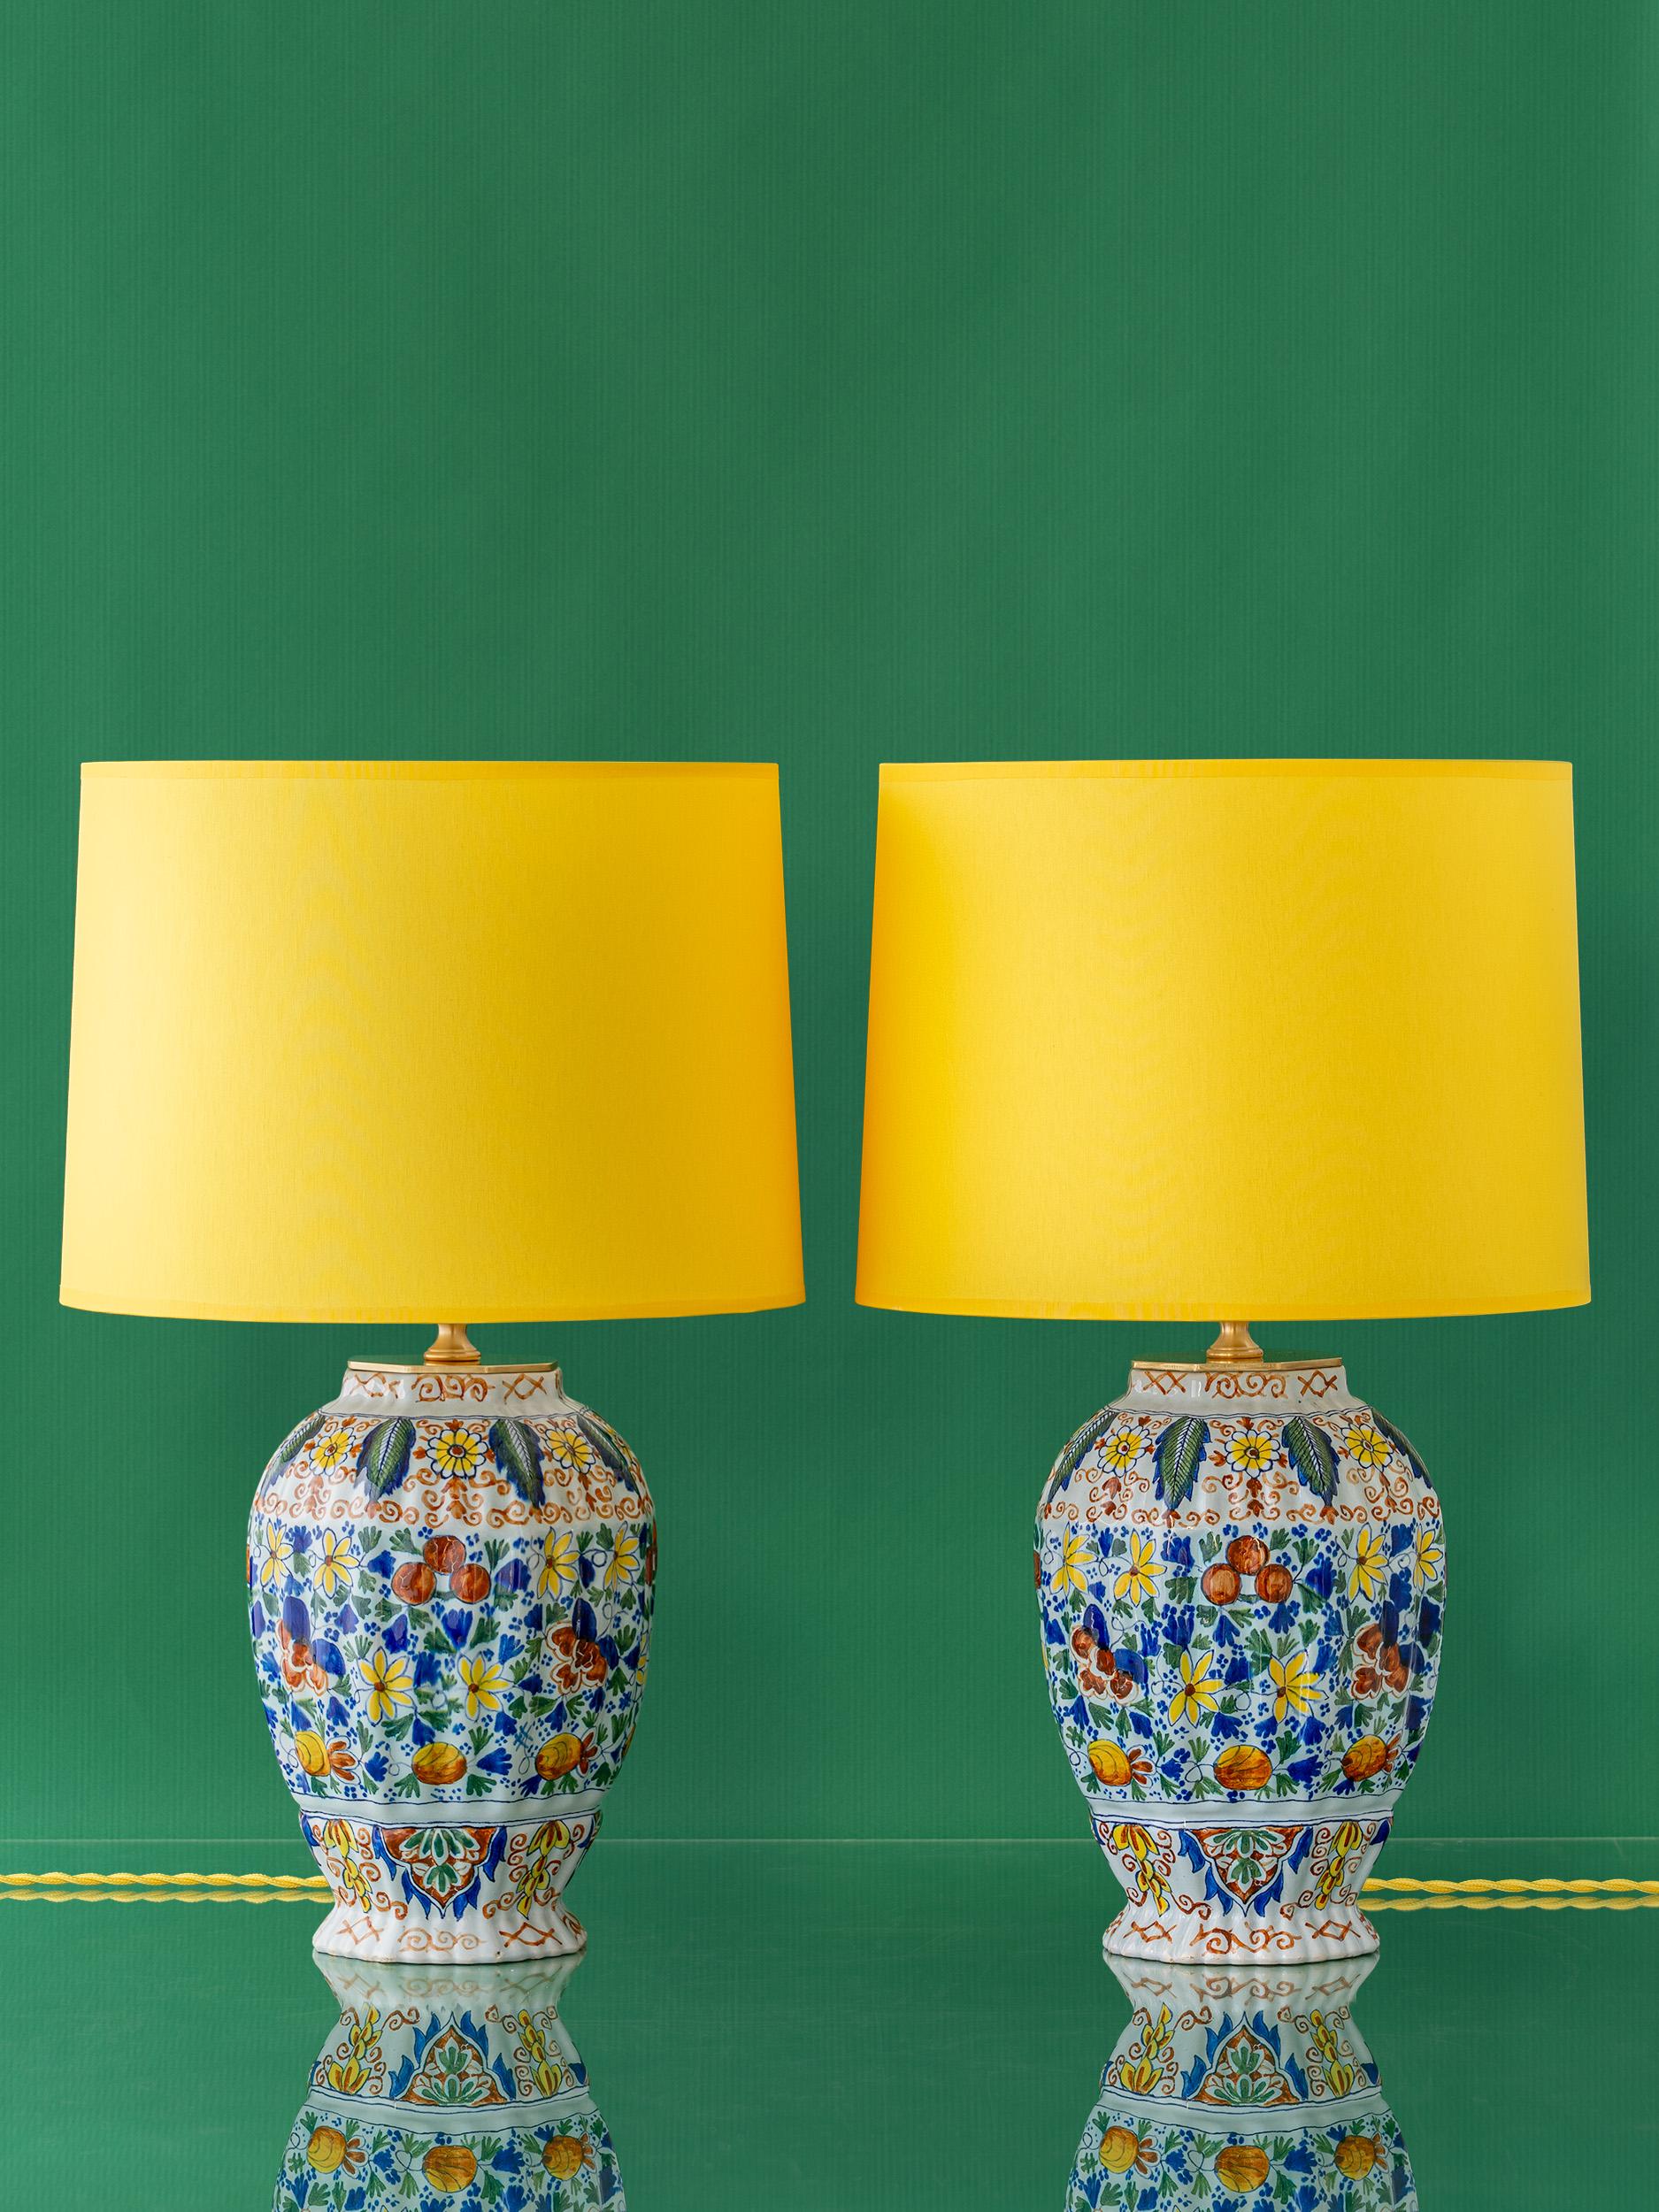 Pair of Table Lamps from Antique 